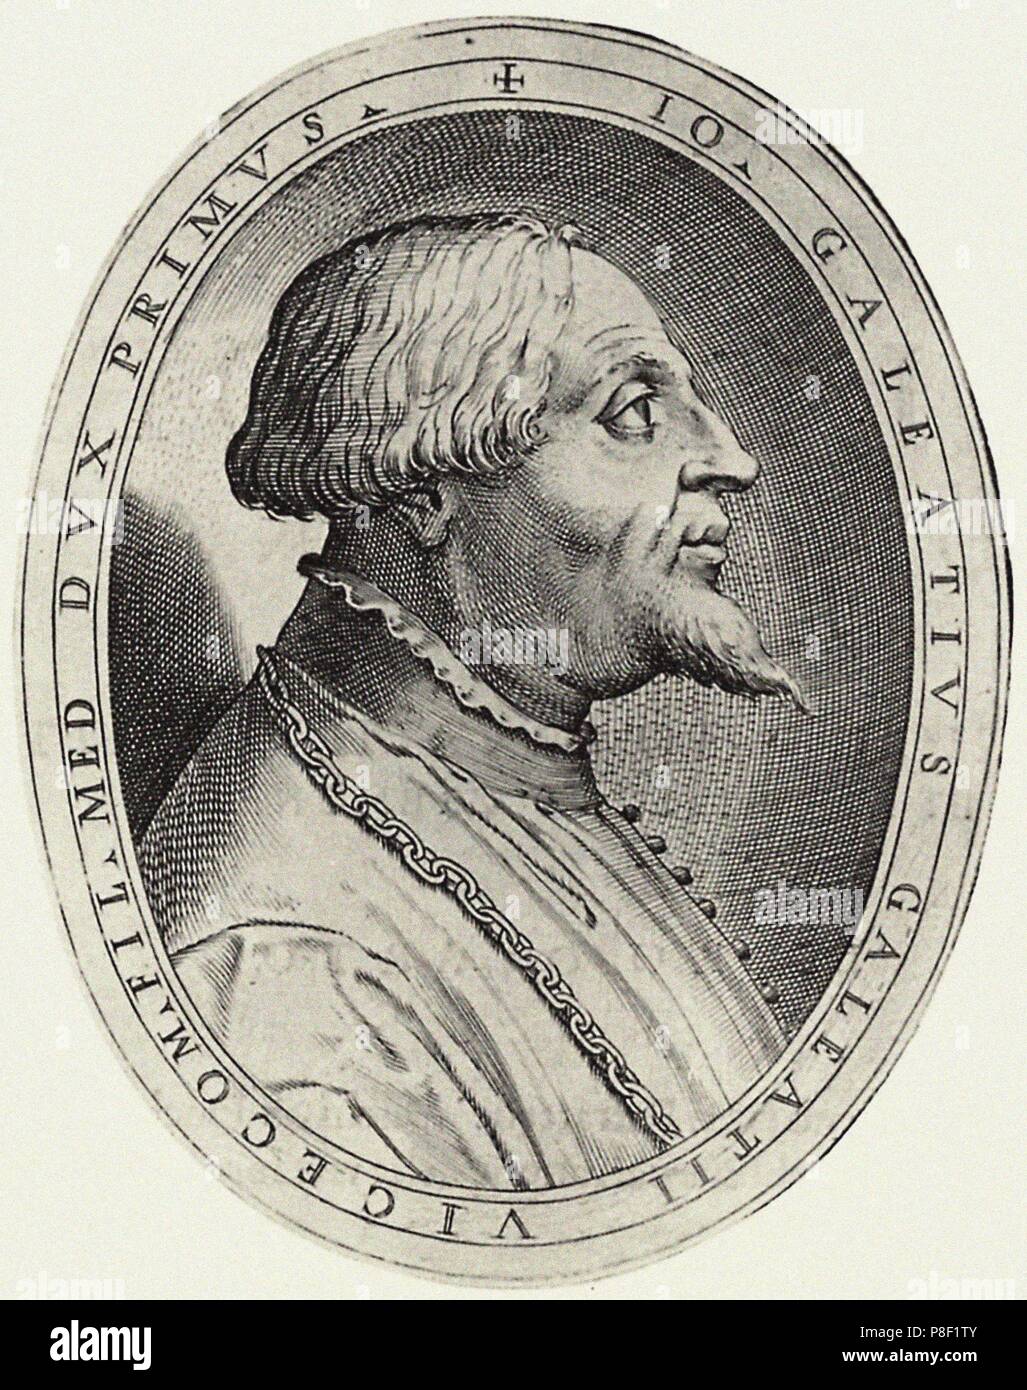 Portrait of Gian Galeazzo Visconti, the first Duke of Milan. Illustration for 'Cremona fedelissima'. Museum: PRIVATE COLLECTION. Stock Photo